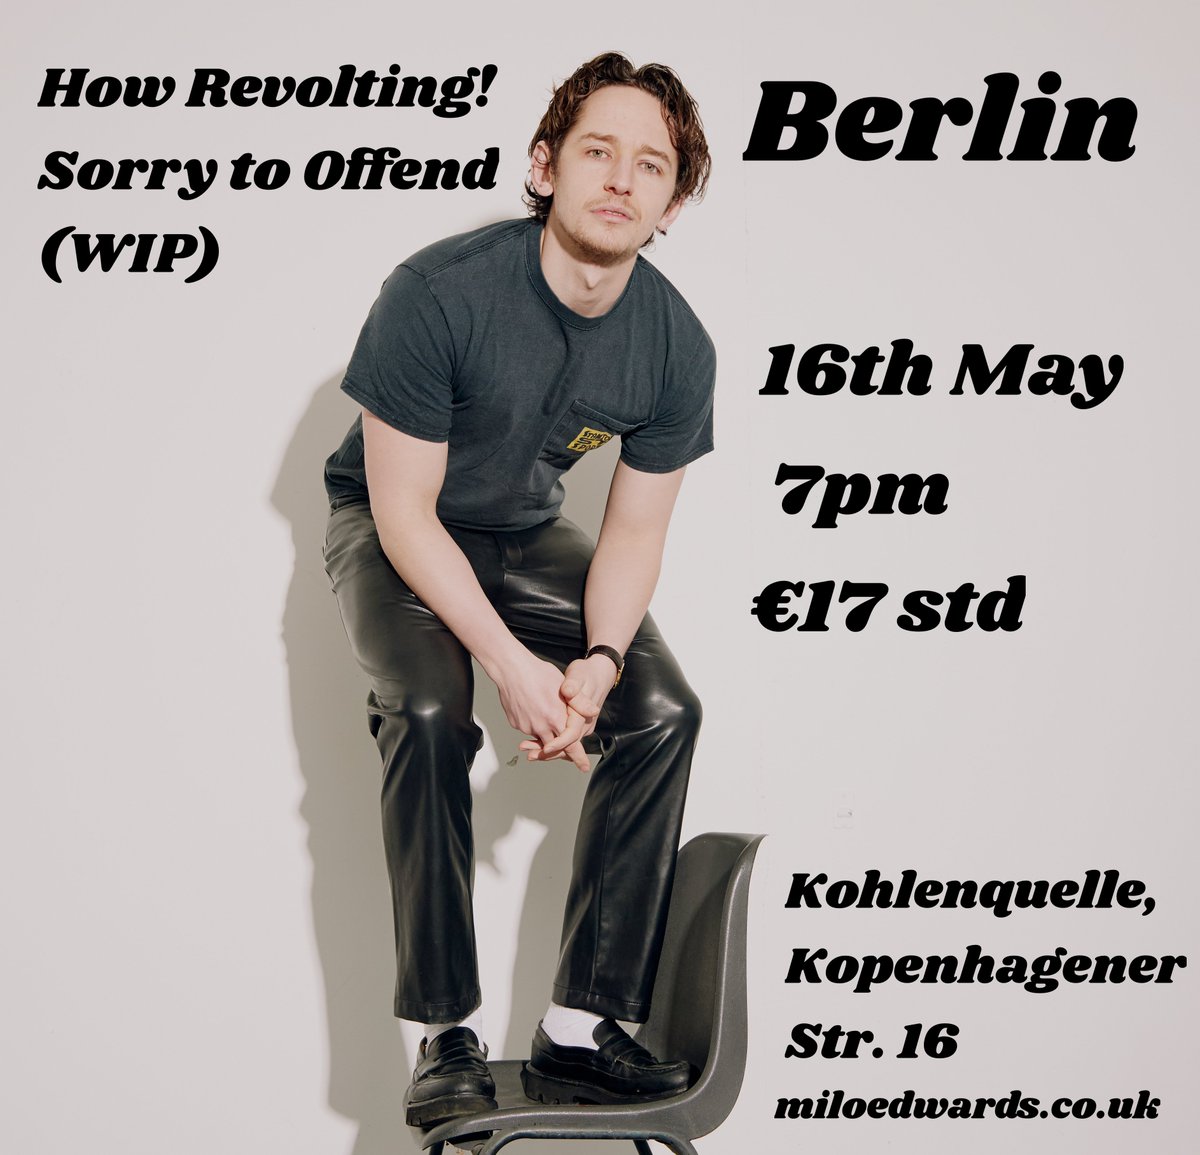 BERLIN! i'm bringing my completely new show to kohlenquelle on may 16th - some cheaper early-bird tickets are still available if you hurry! (tix in thread)